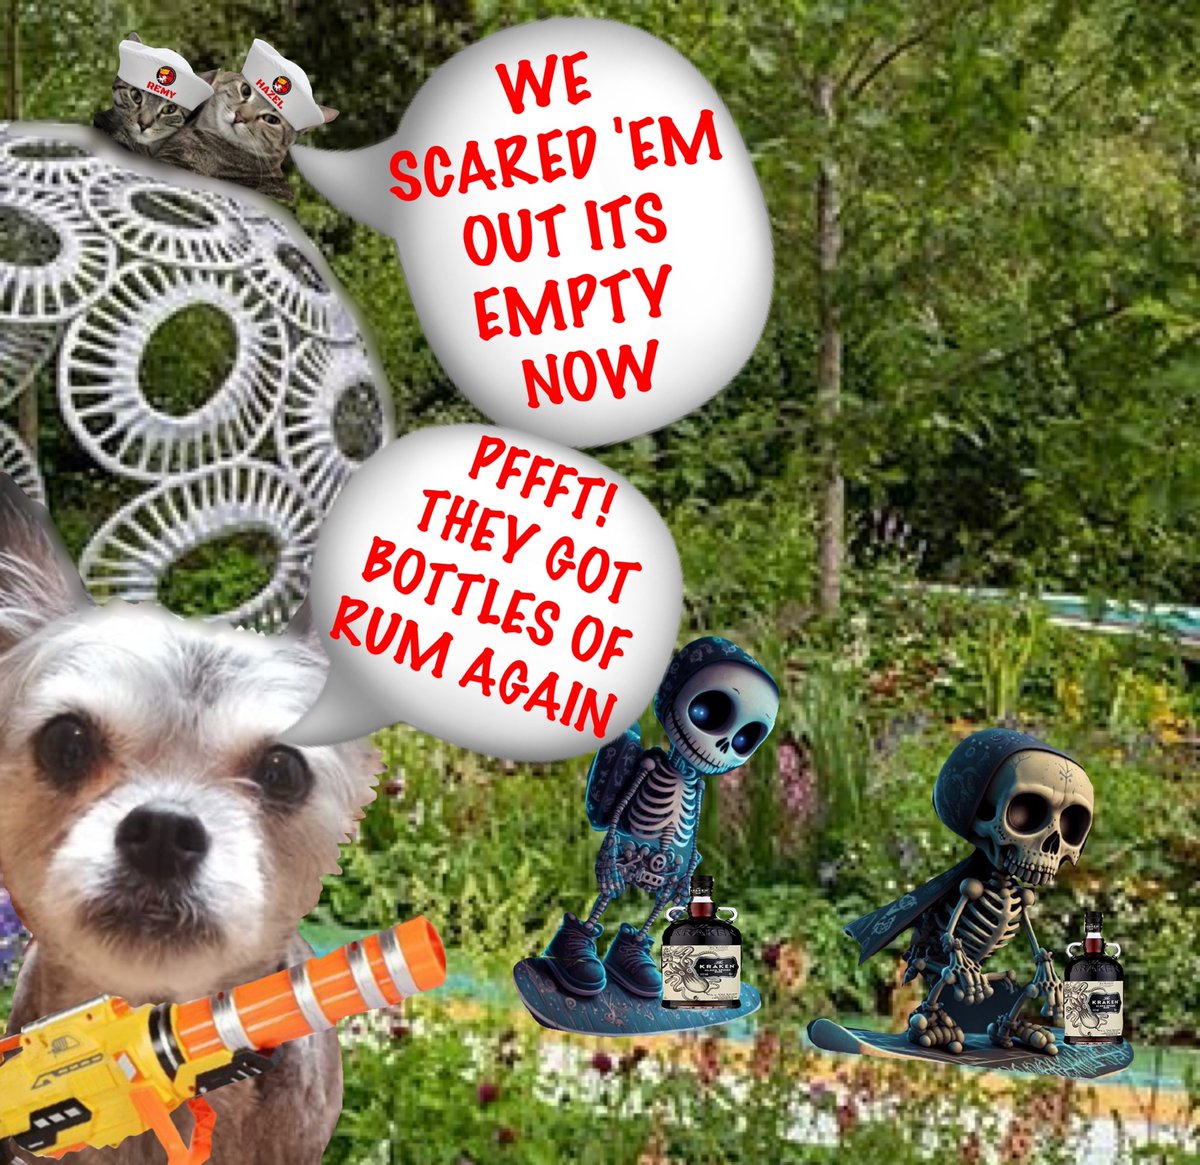 4 #zzst 🌸🪷🌺🪻🪻🌻🌹🌷🌸🪷🌺🪻🌻🌹🌷💐
WELL DONE CATS FOR FLUSHING THEM OUT
OH NOOOOO  THEY HAVE GOT HOLD OF RUM AGAIN
THEY FORGET IT GOES IN THE MOOUTH & OUT THROUGH THEIR RIBS😂🤣😂😅
Well done for getting those two👍🏻